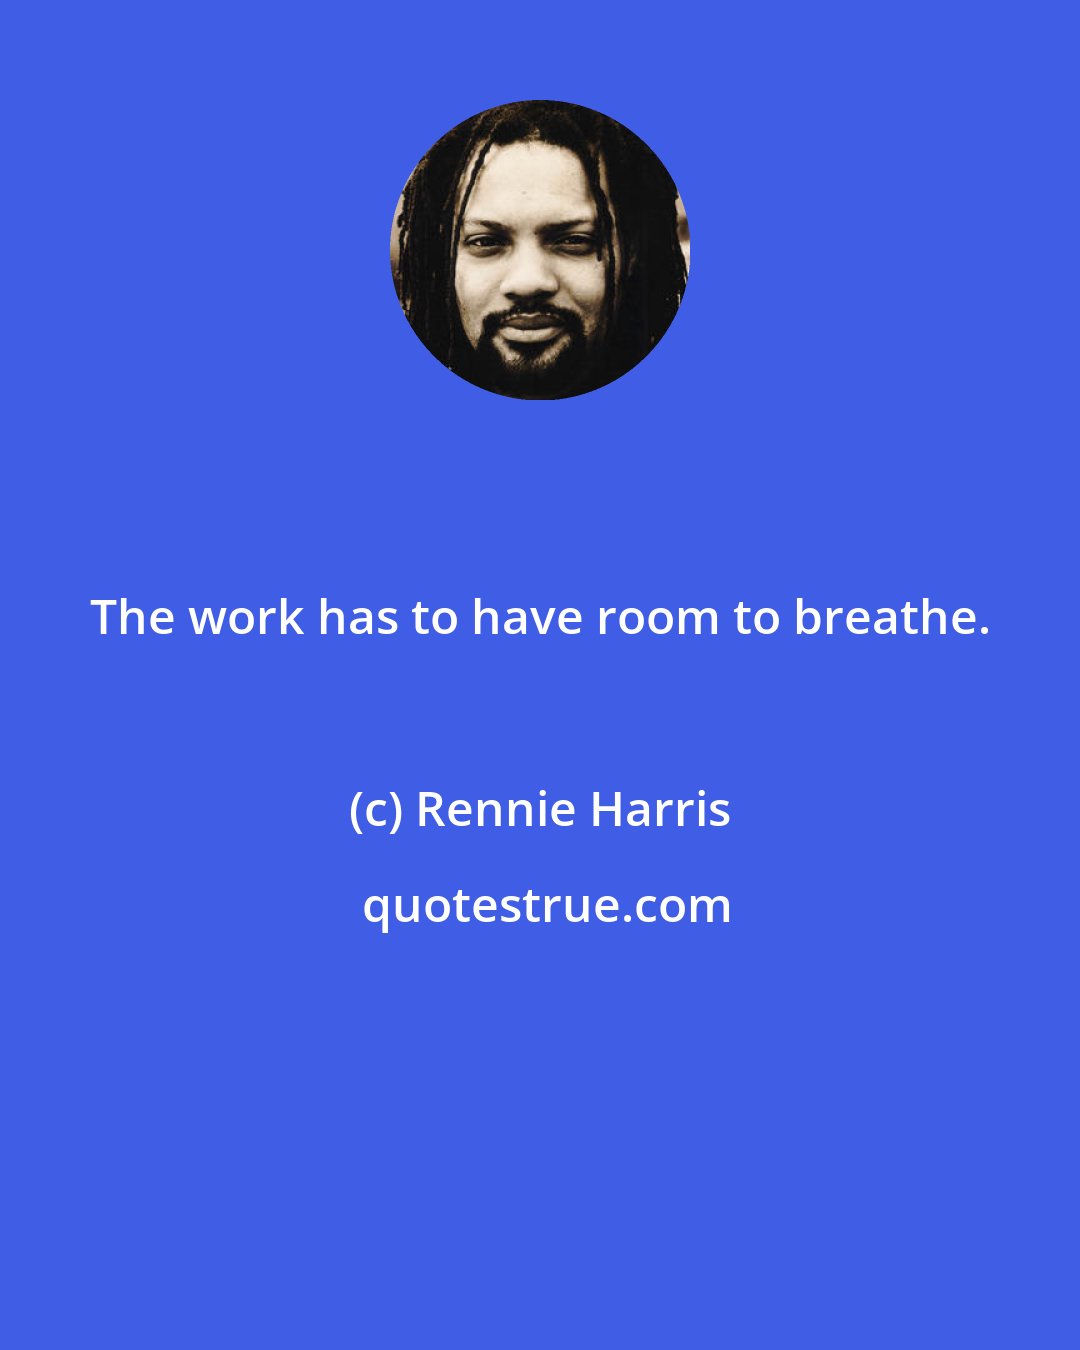 Rennie Harris: The work has to have room to breathe.